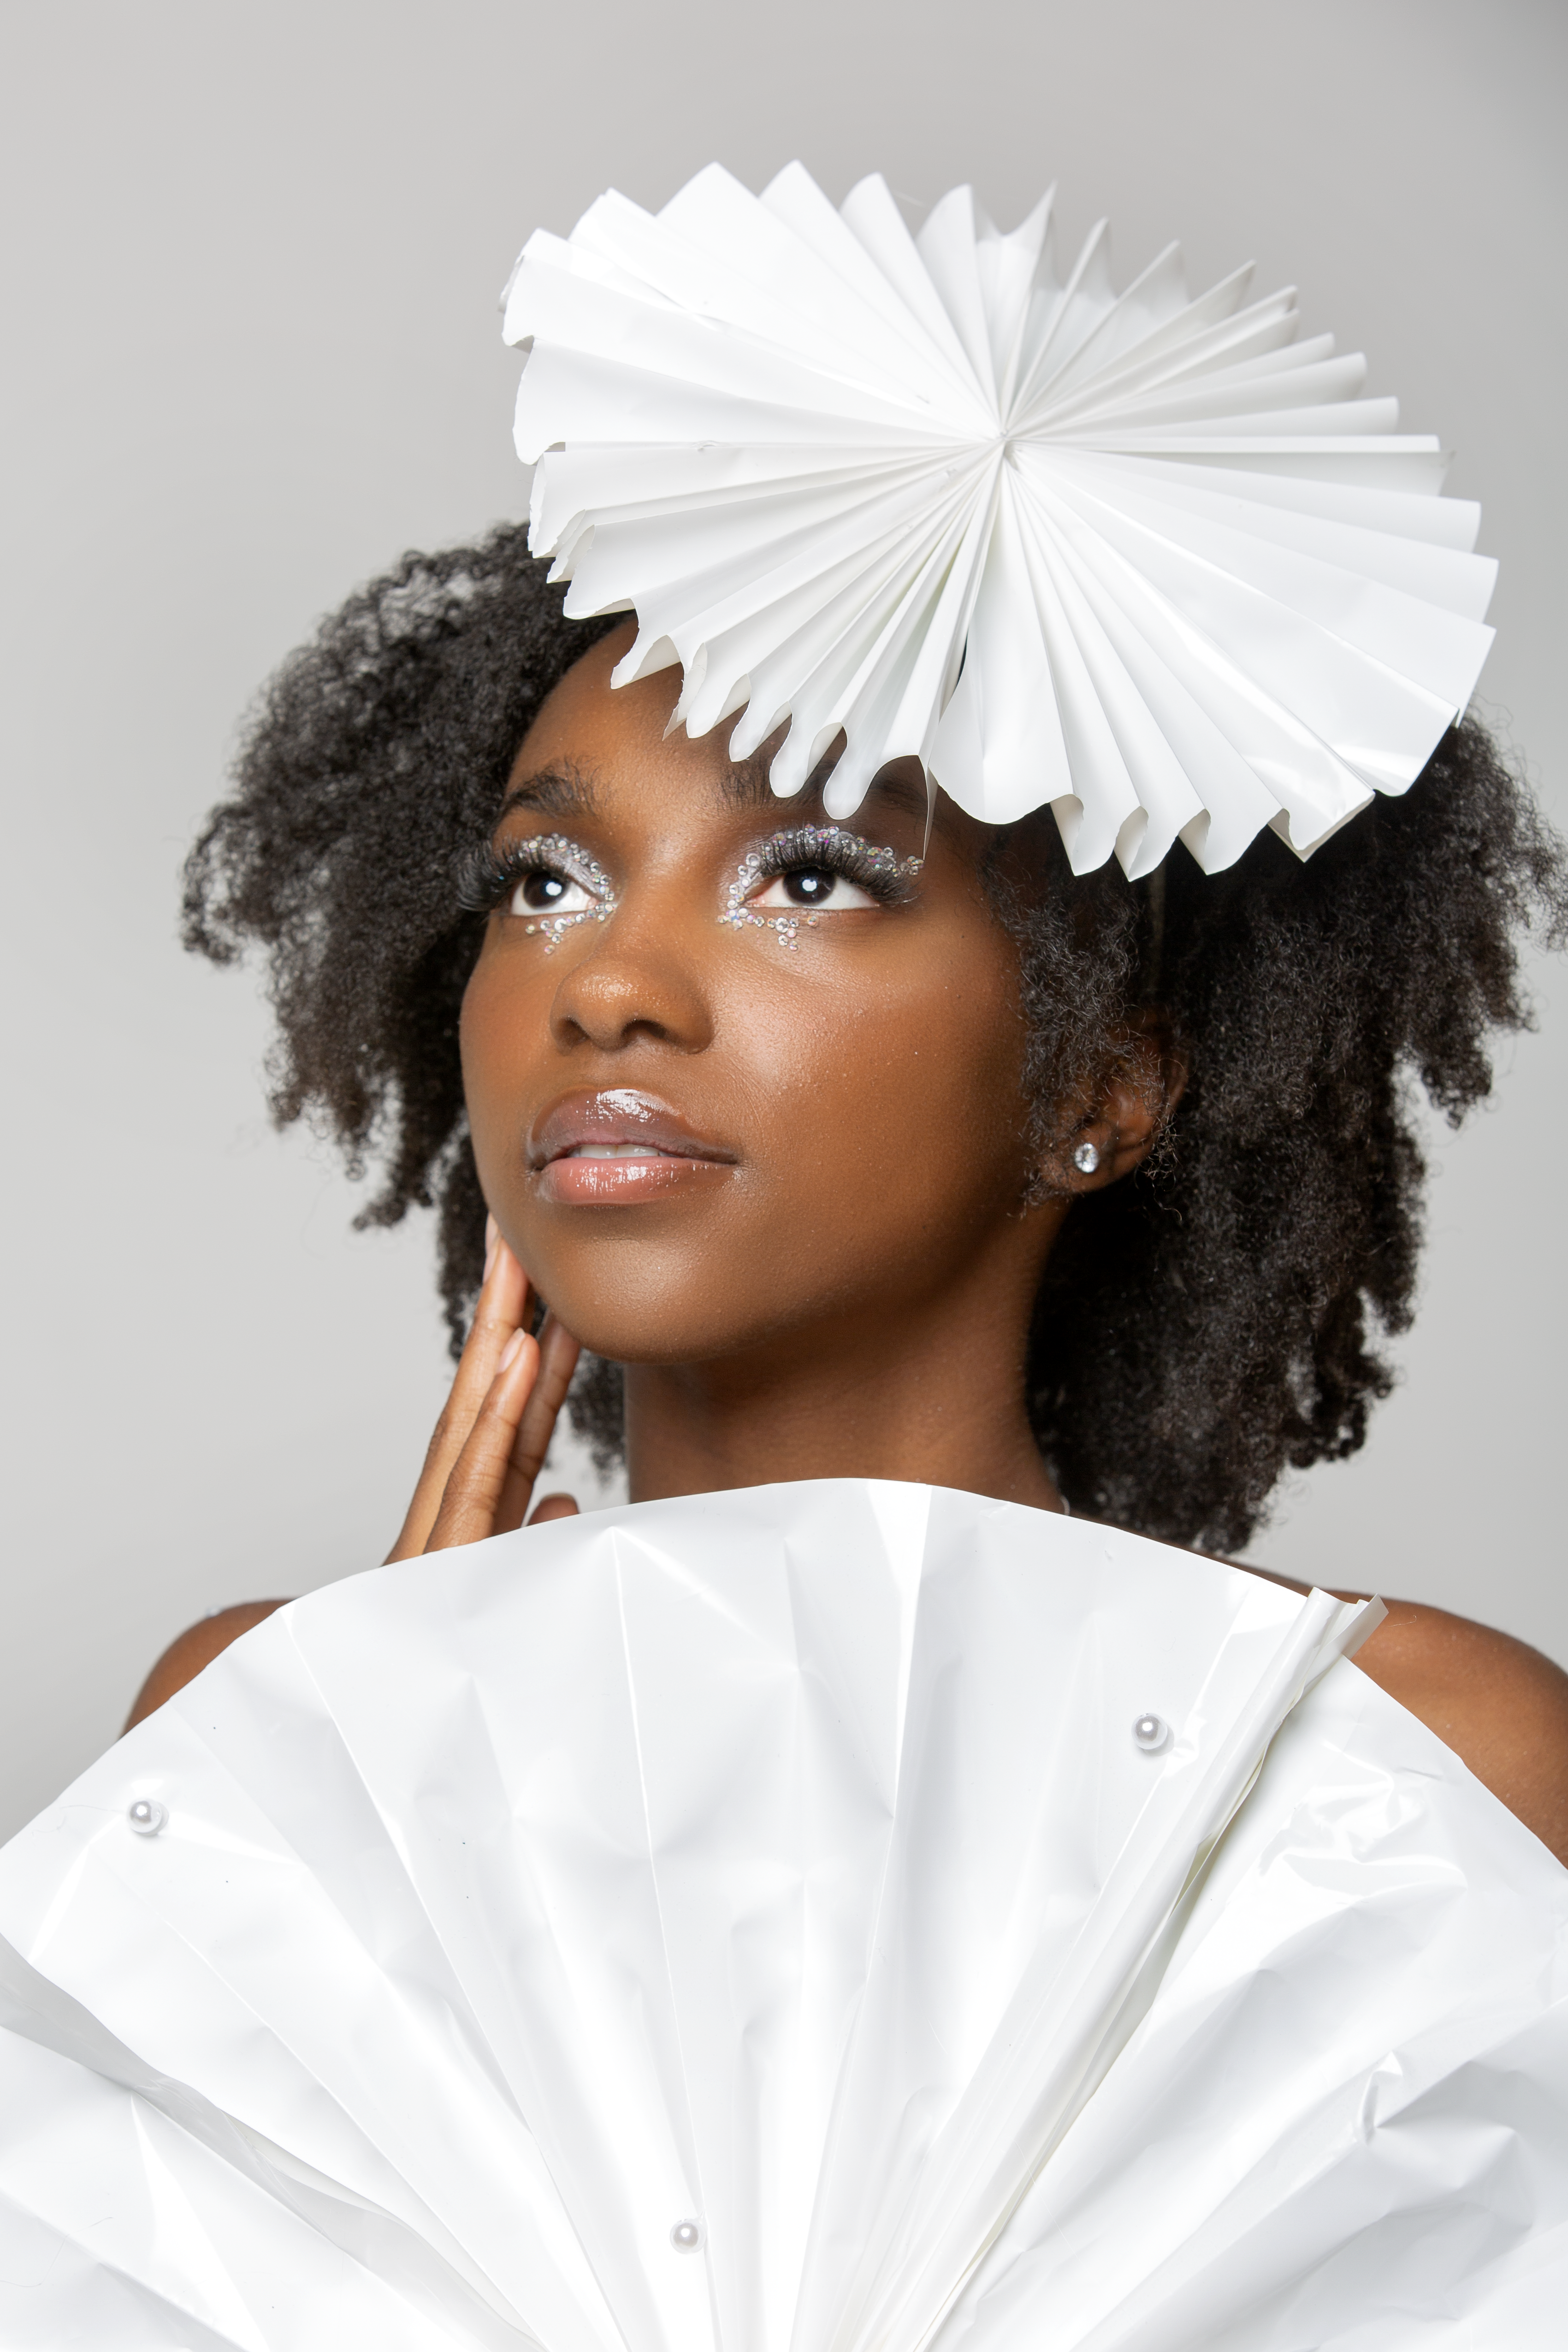 A Midtown High School student models innovative fashions created with all-recycled materials